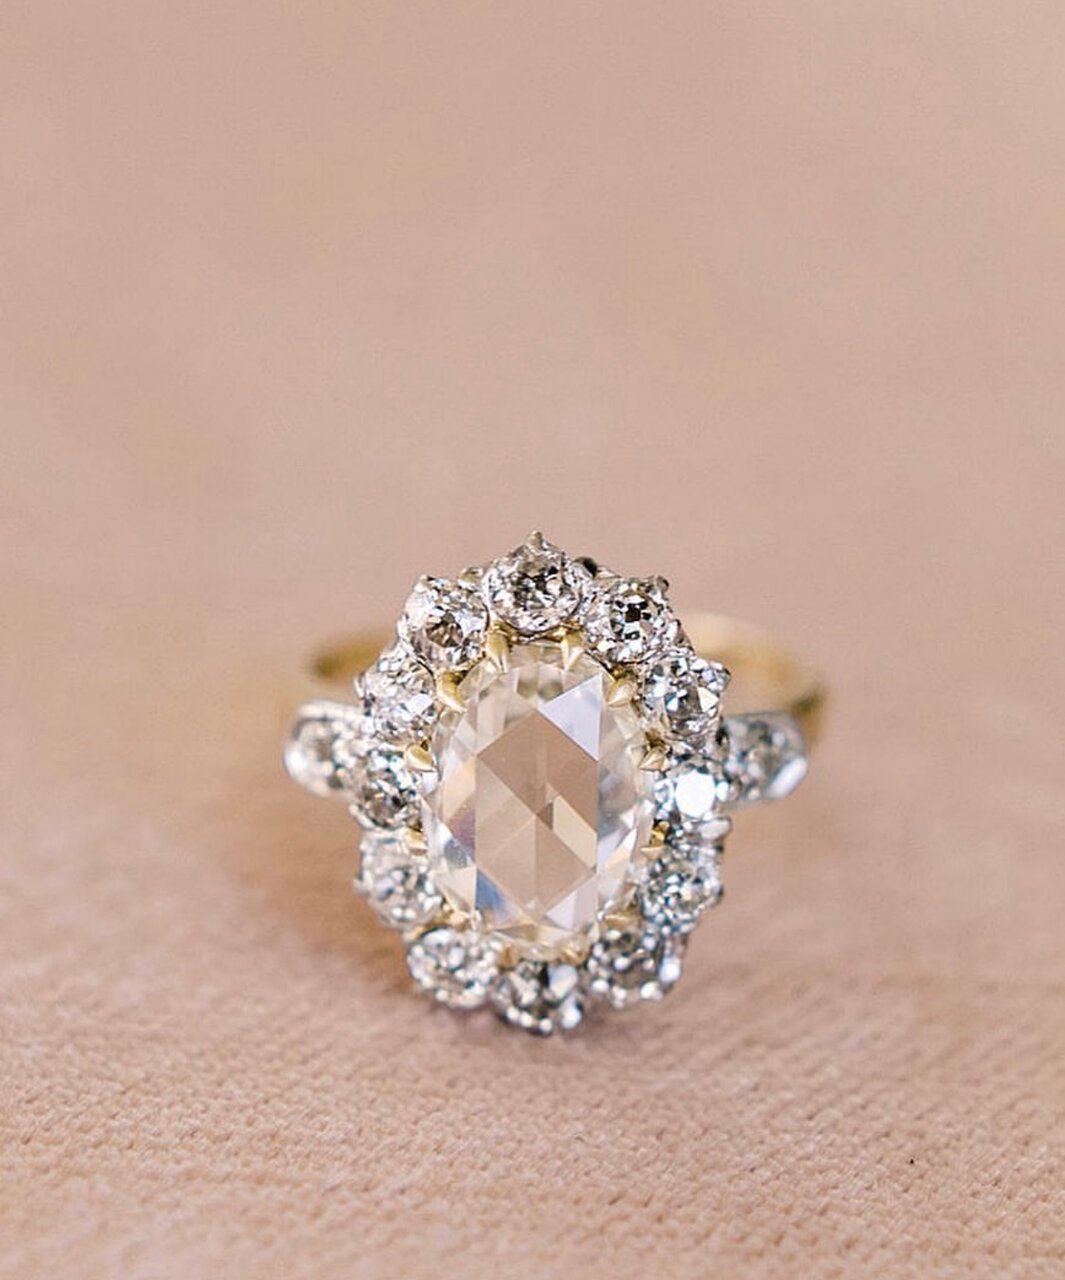 JLS posted pics of her fantabulous rose cut engagement ring on the Show Me the Bling forum at PriceScope!  This rose cut in halo will turn many people into rose cut lovers! Do you love rose cuts?